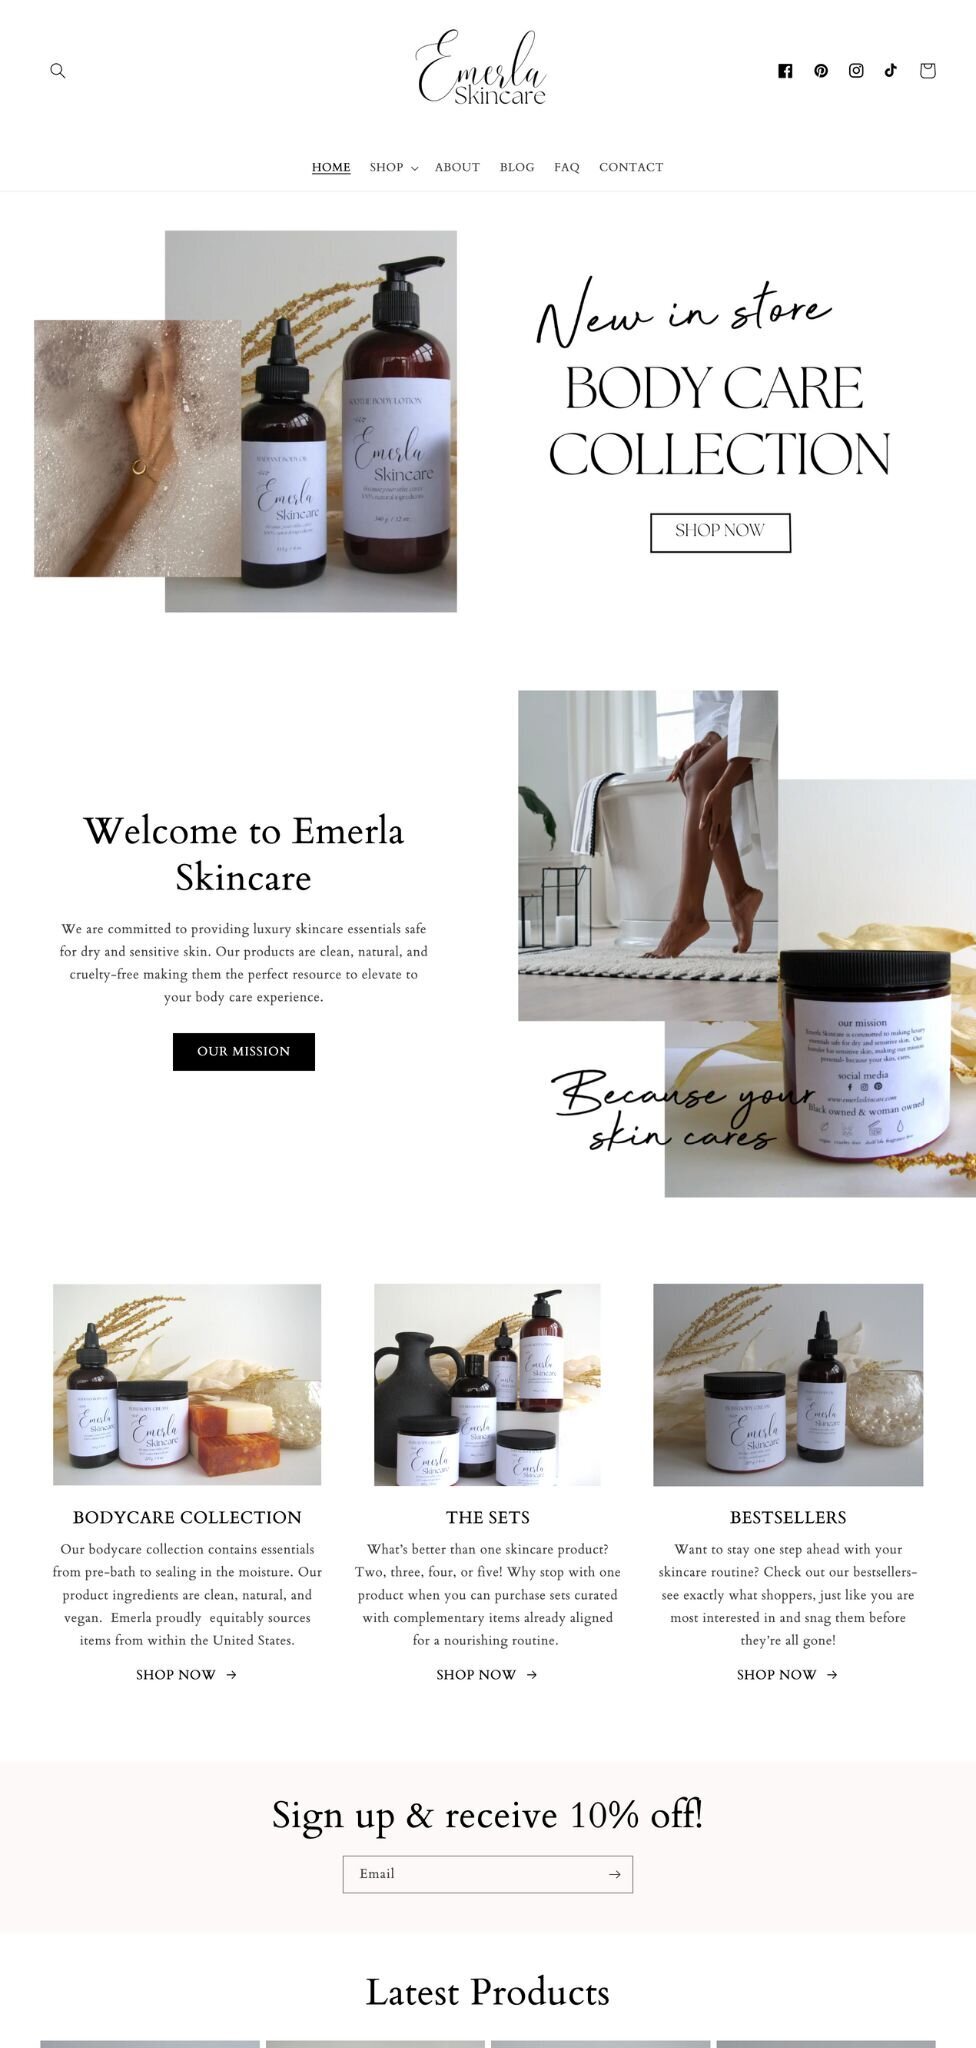 clients-shopify-themes23